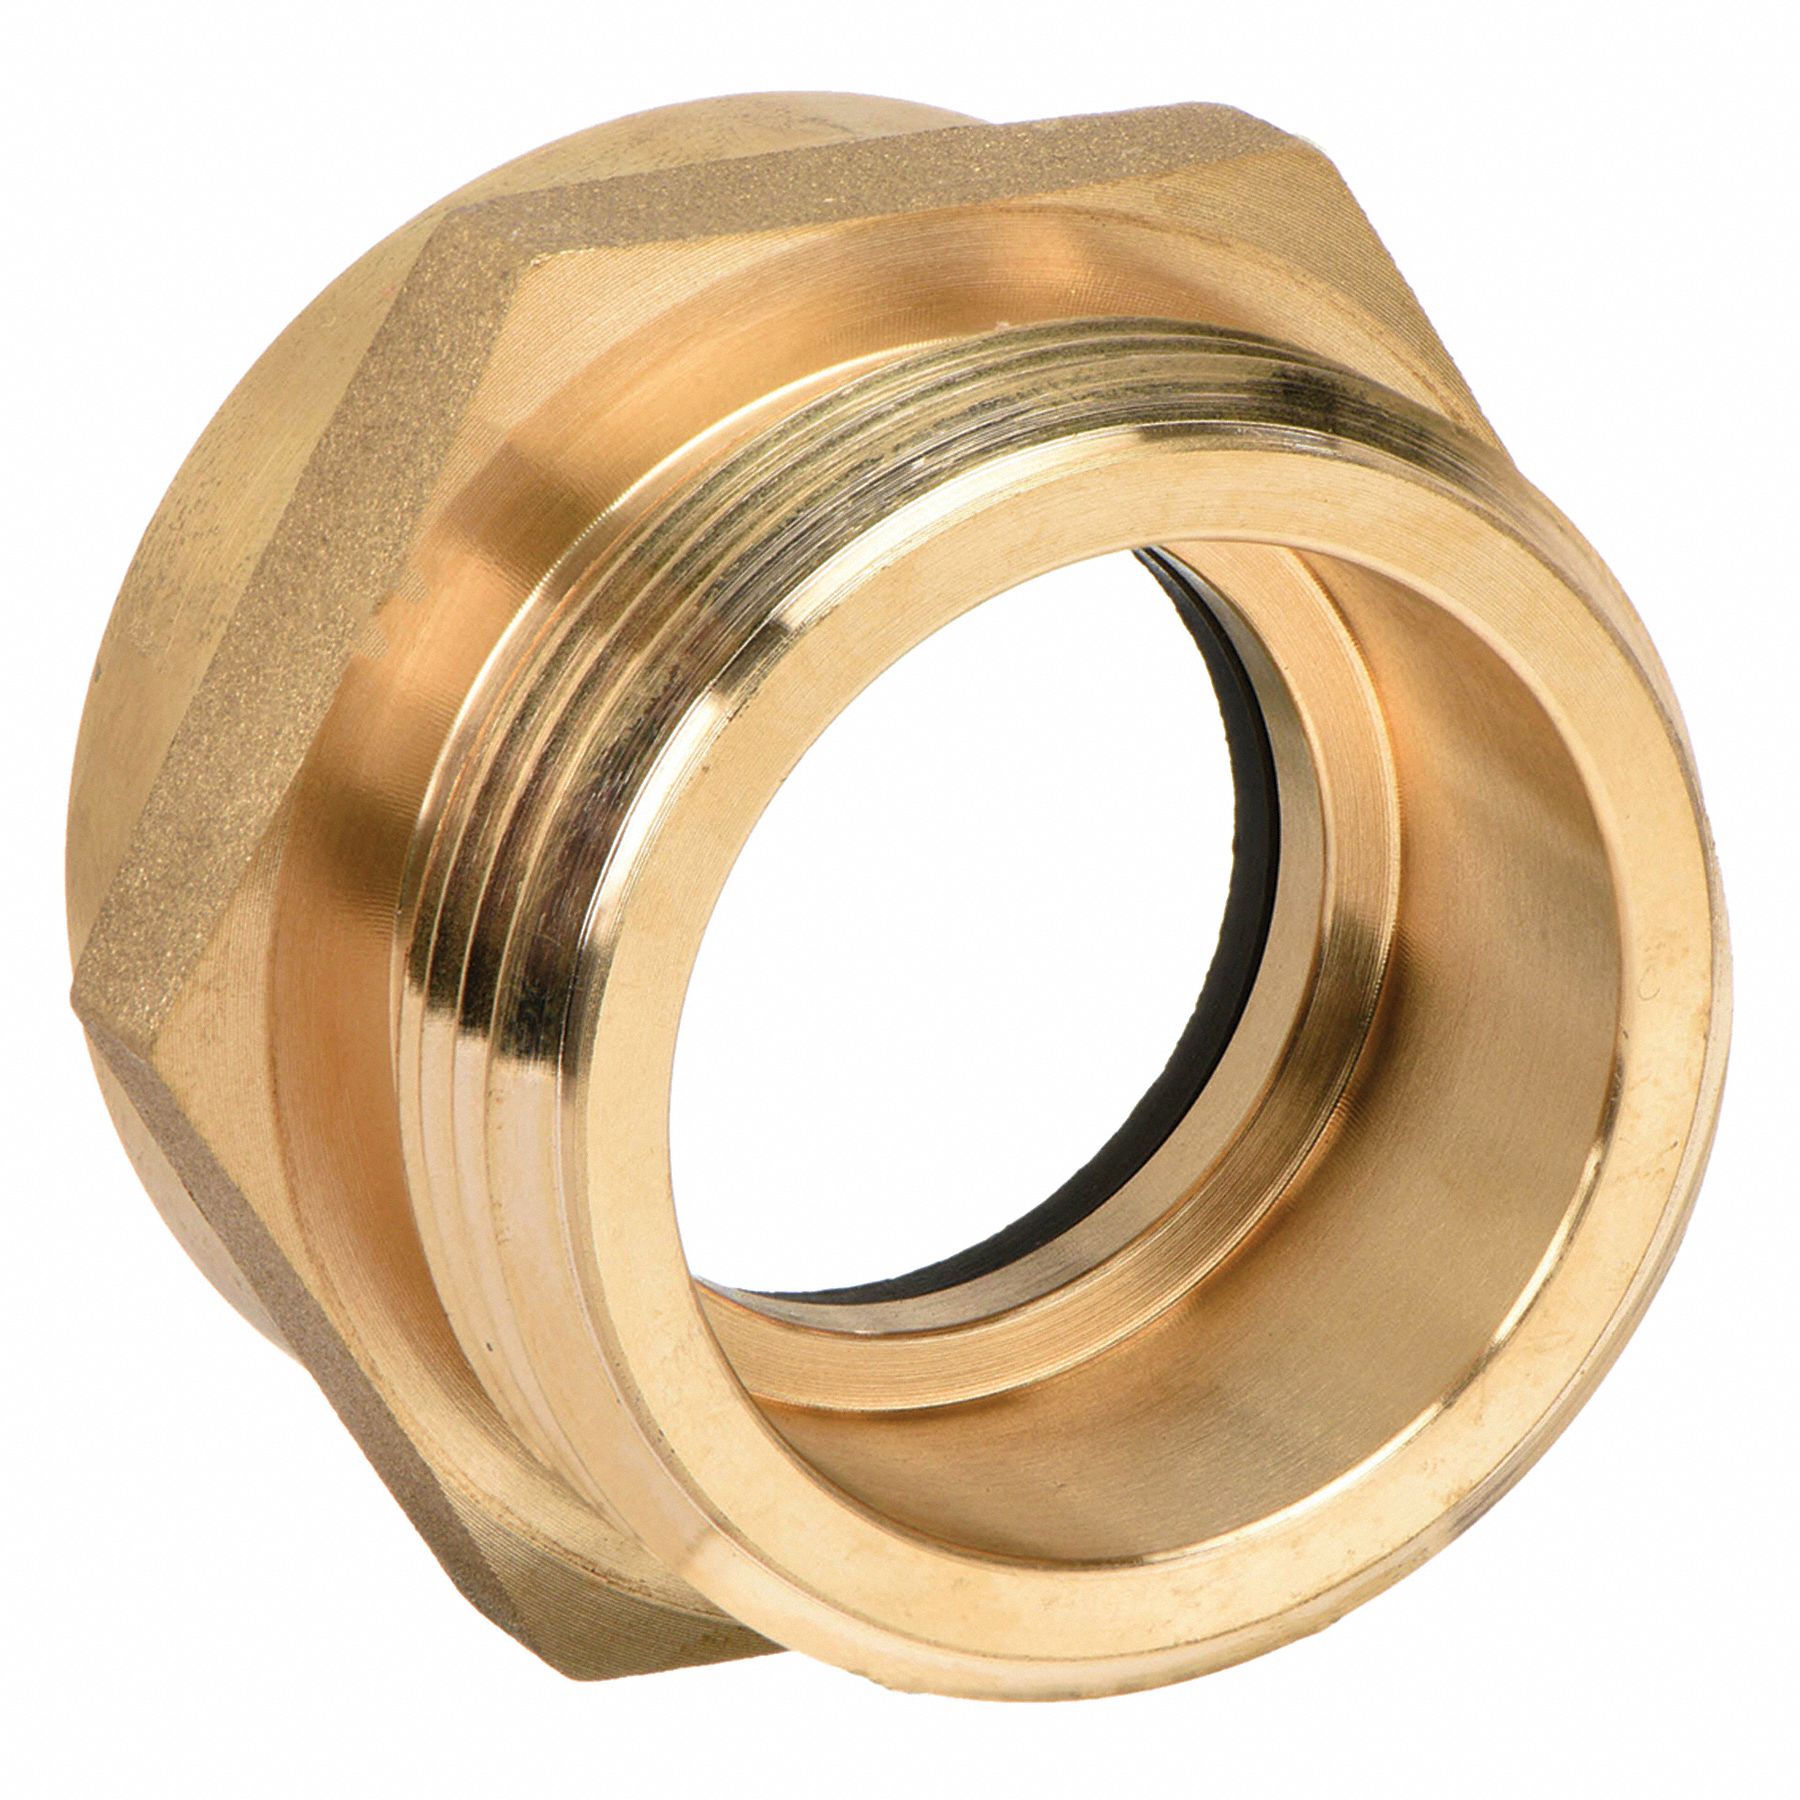 Fire Hose Adapter Fitting Material Brass x Brass Fitting Size 1-1/2 x 3/4 Pack of 5 Pin Lug 